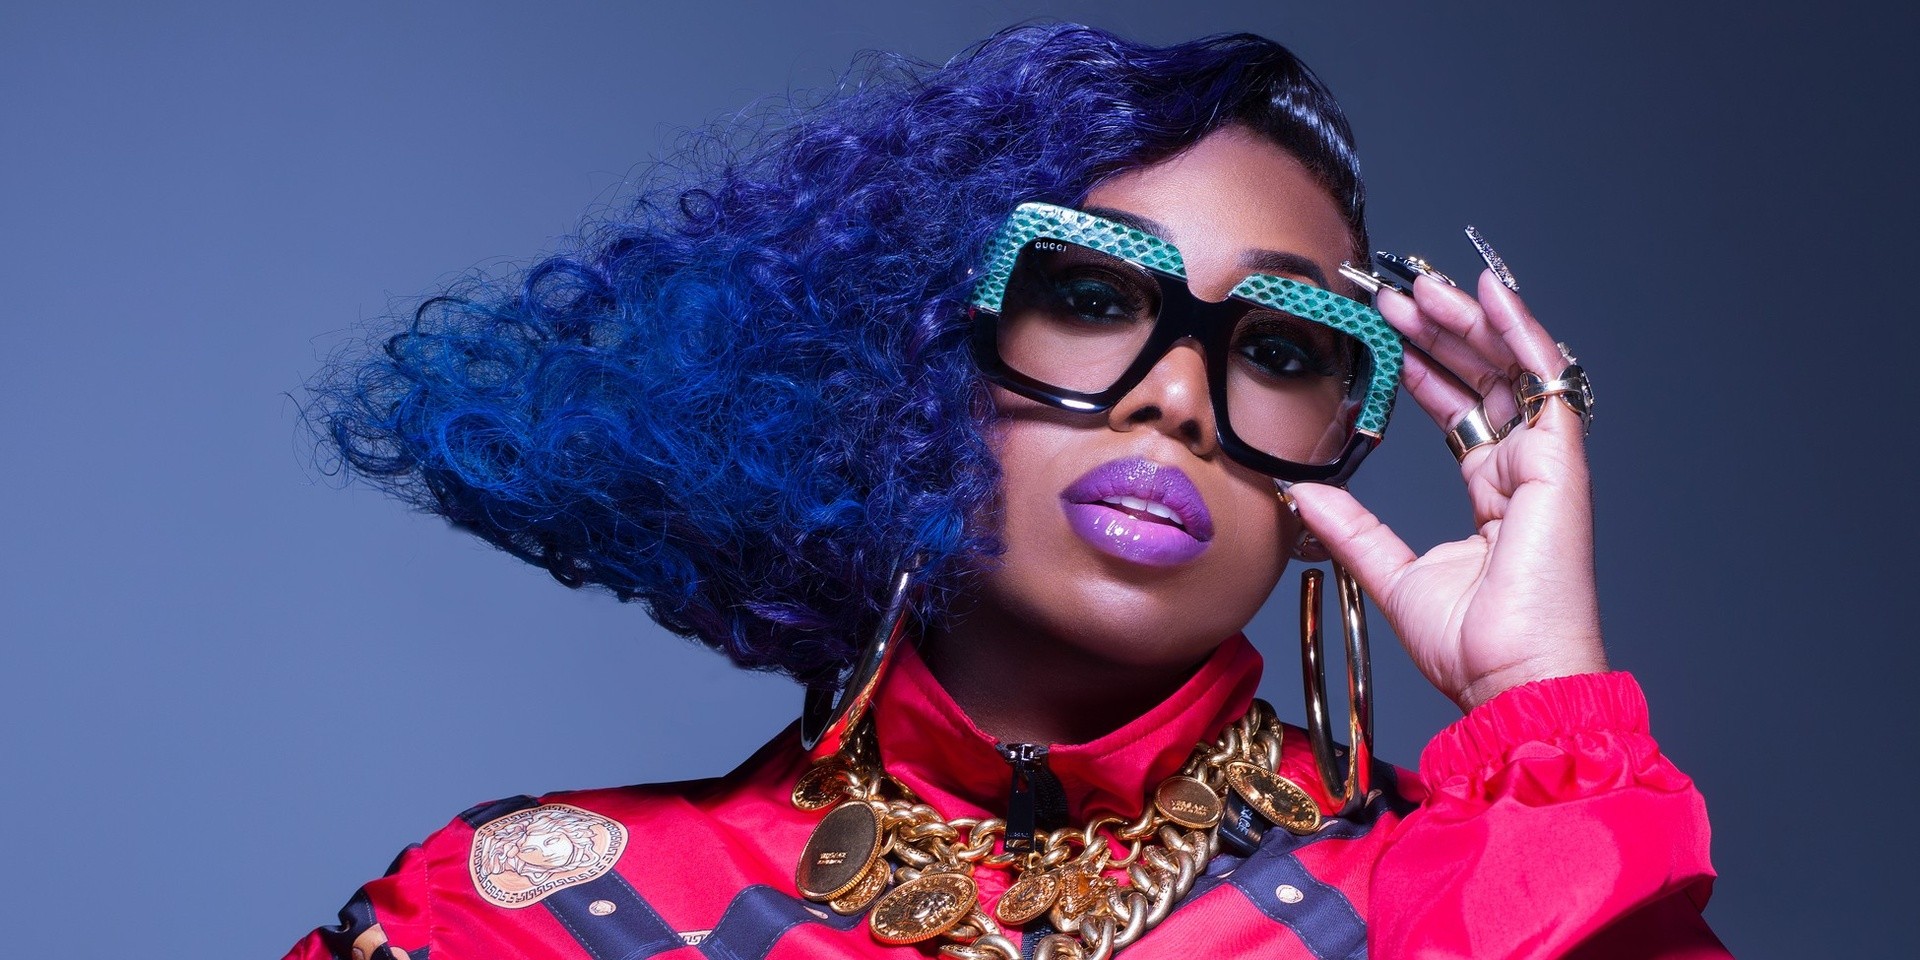 Missy Elliott will be the first female rapper to receive the MTV Video Vanguard Award 